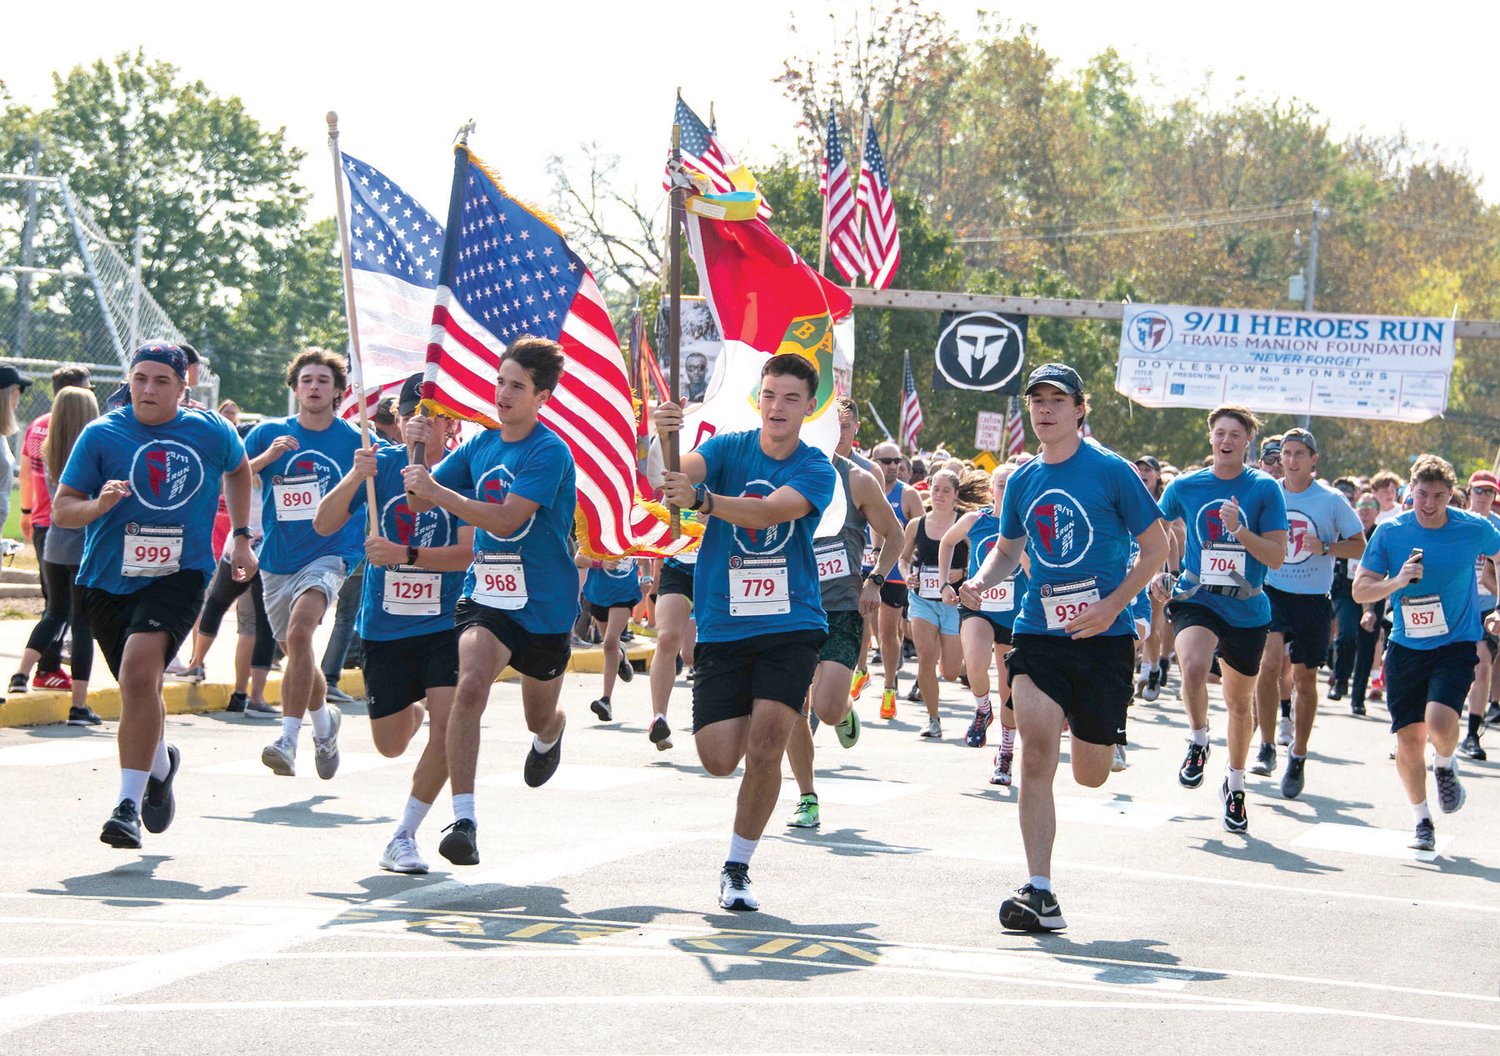 Flag carrying runners take off at the start of the 9/11 Heroes Run in Doylestown Oct. 3.